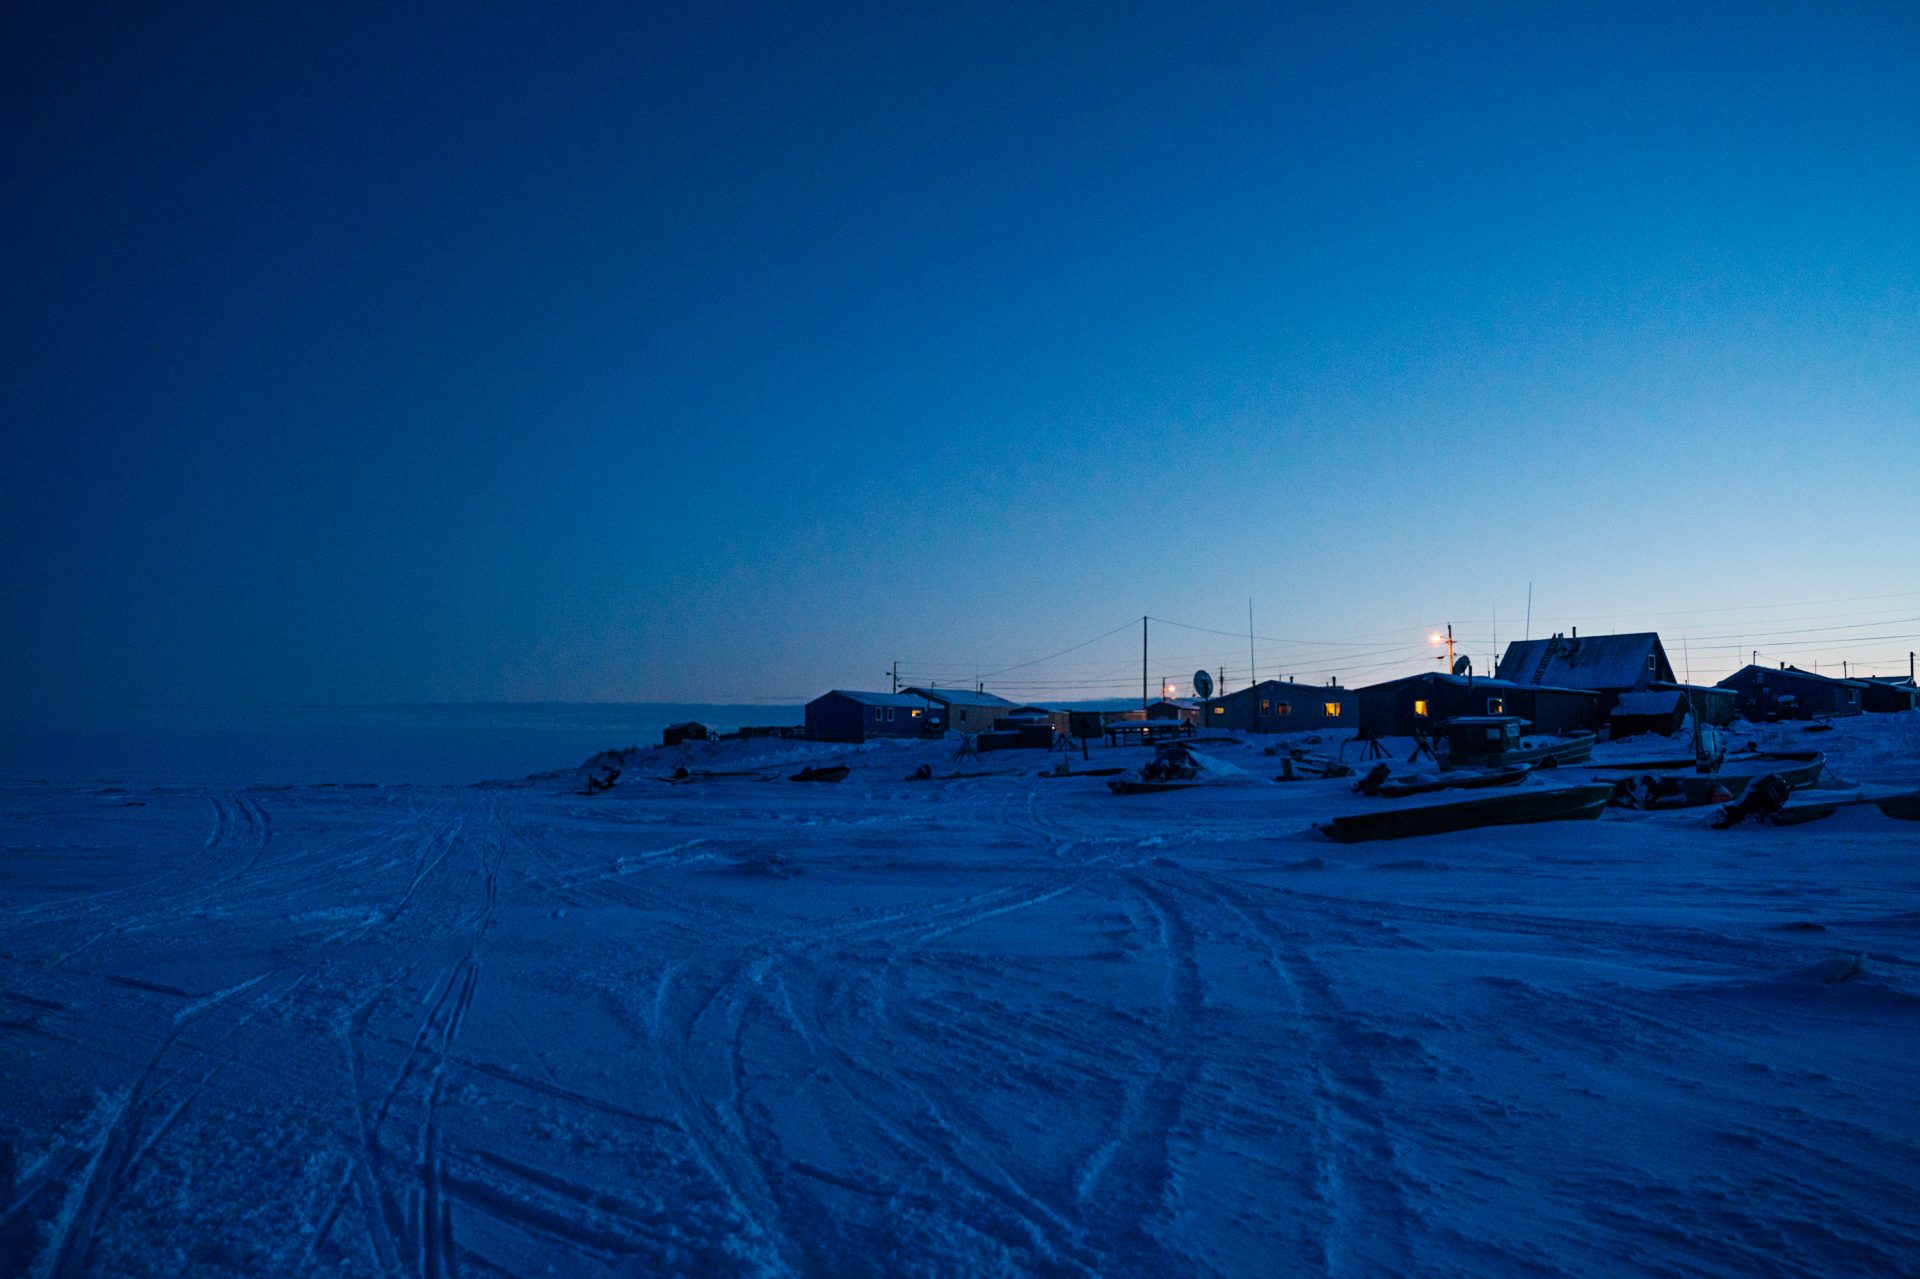 In the fishing village of Toksook Bay, Alaska, the 2020 census officially began last month. The national head count starts in remote Alaska in January because the frozen ground makes it easier to reach the distant communities.